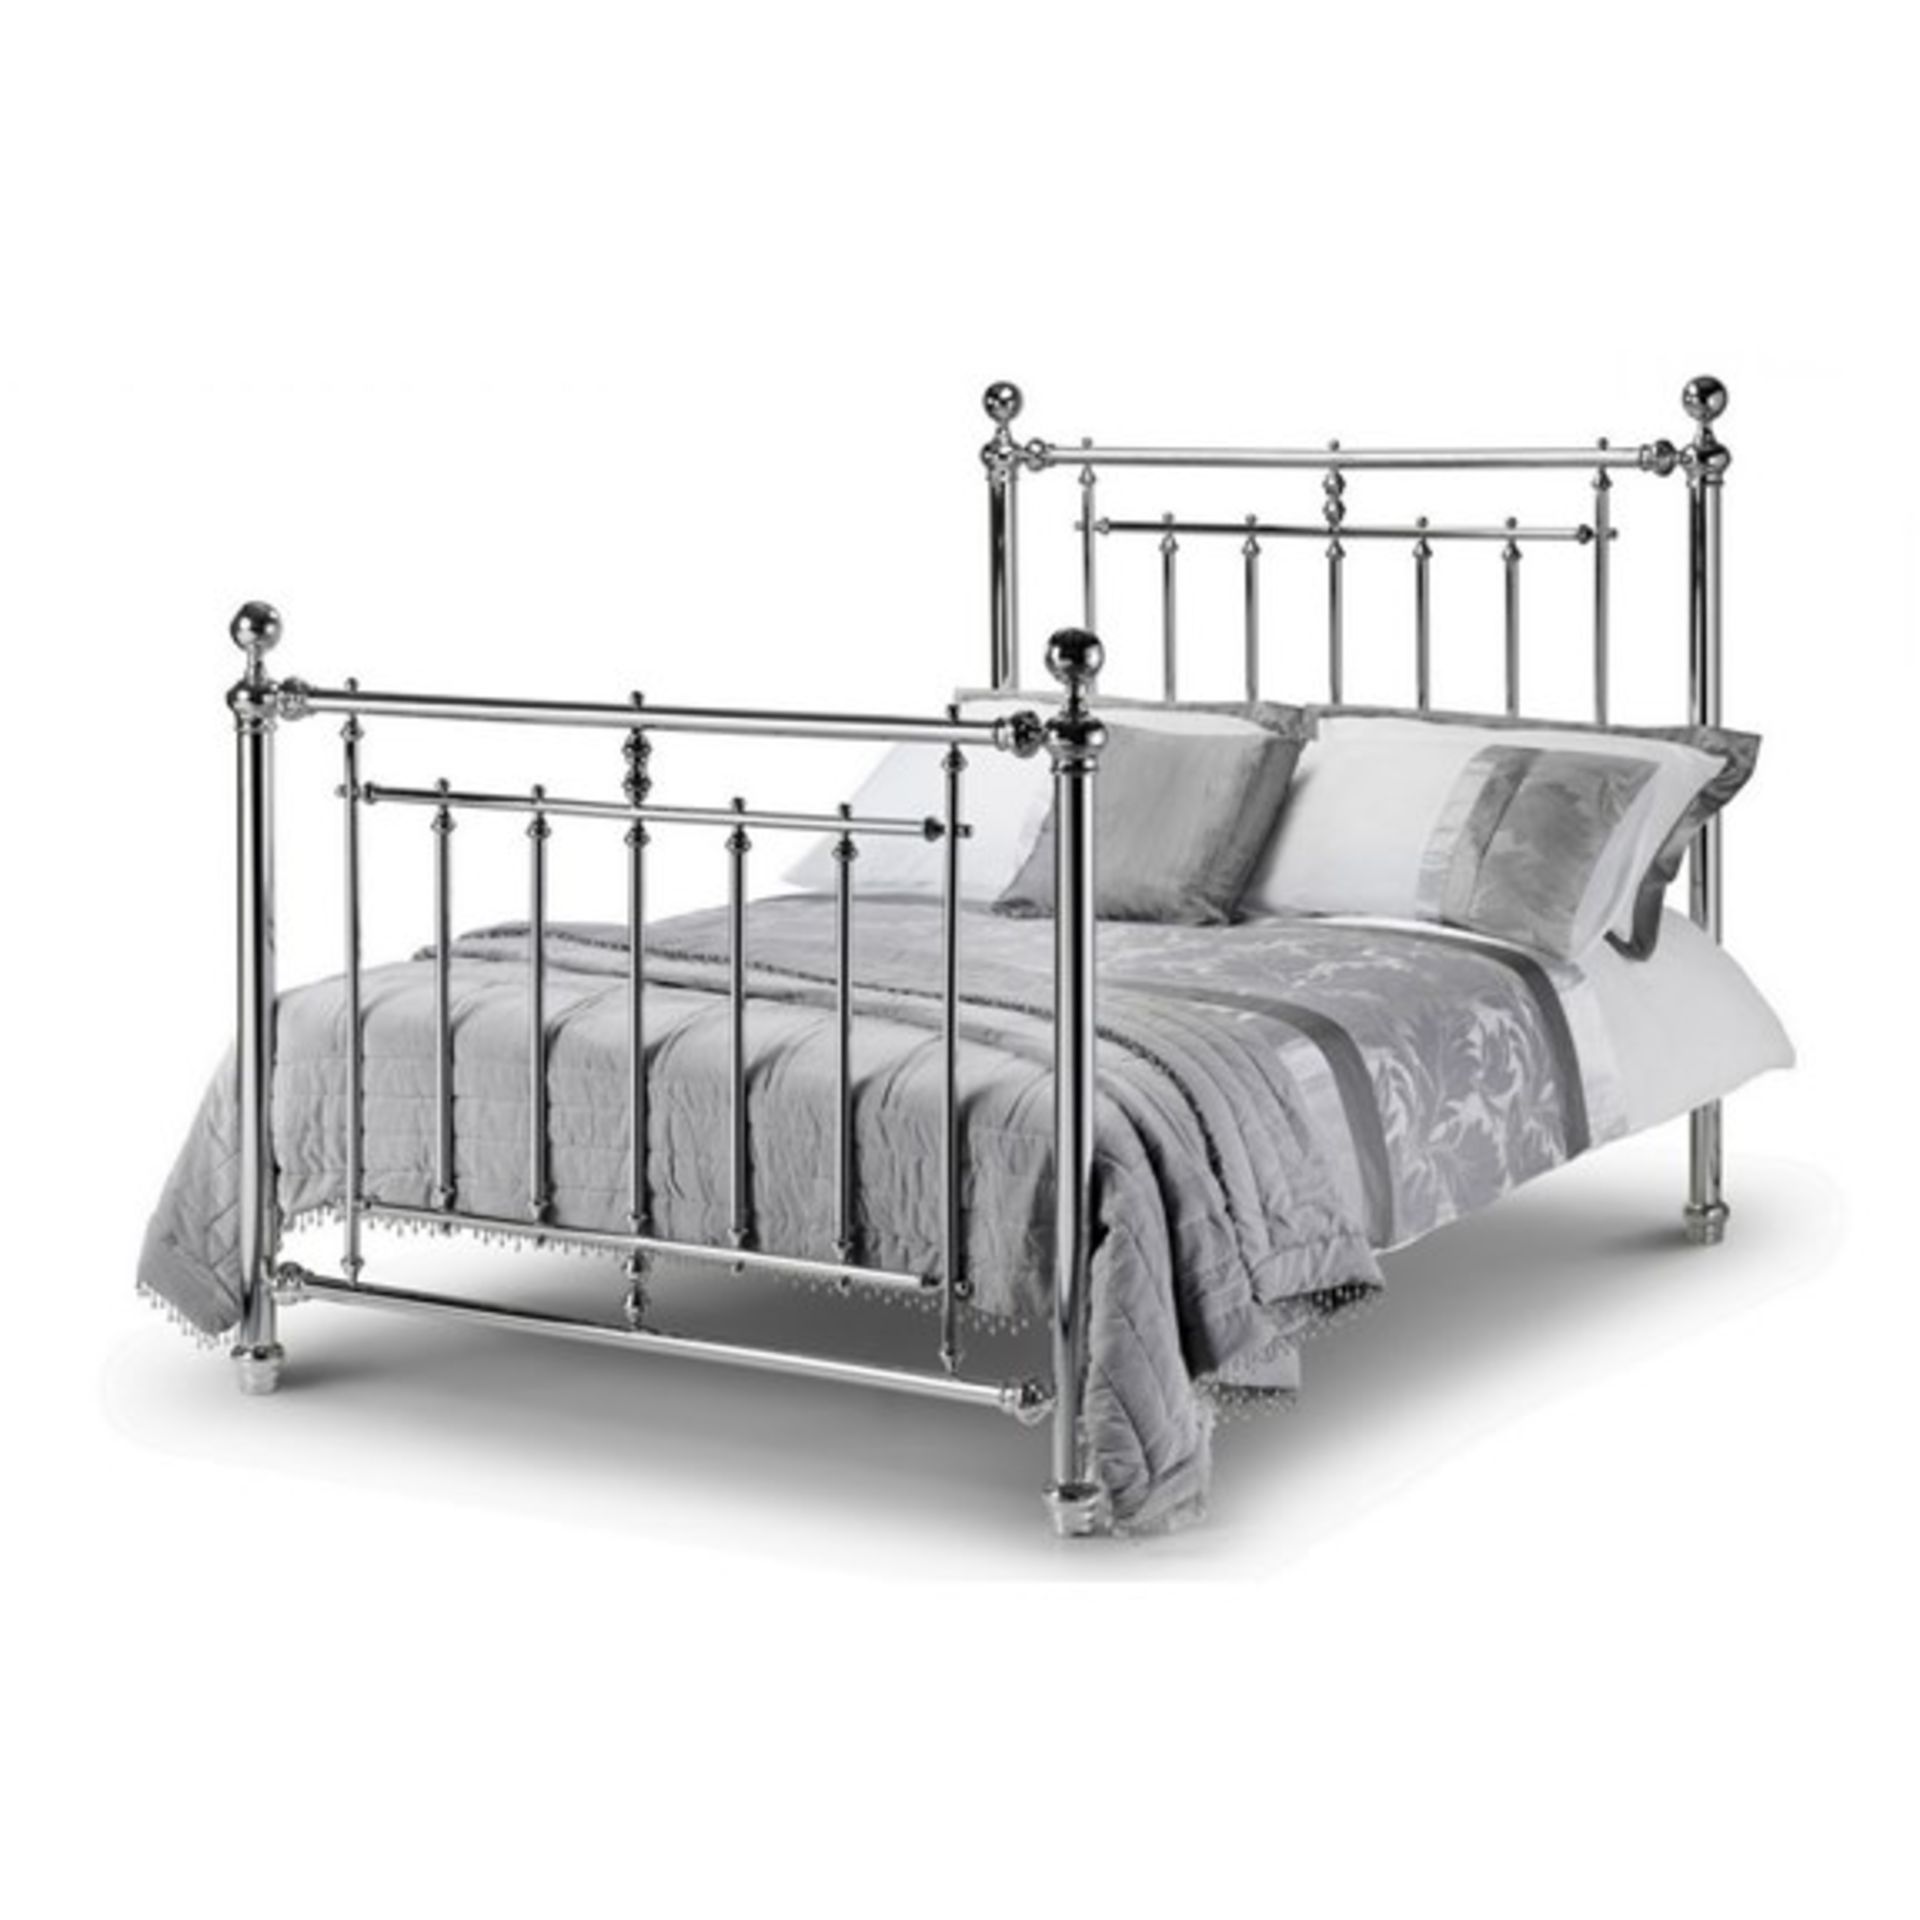 Carpetright Emily 5ft Chrome Bed Frame King RRP ?499.00 This lot is a completely UNCHECKED. We